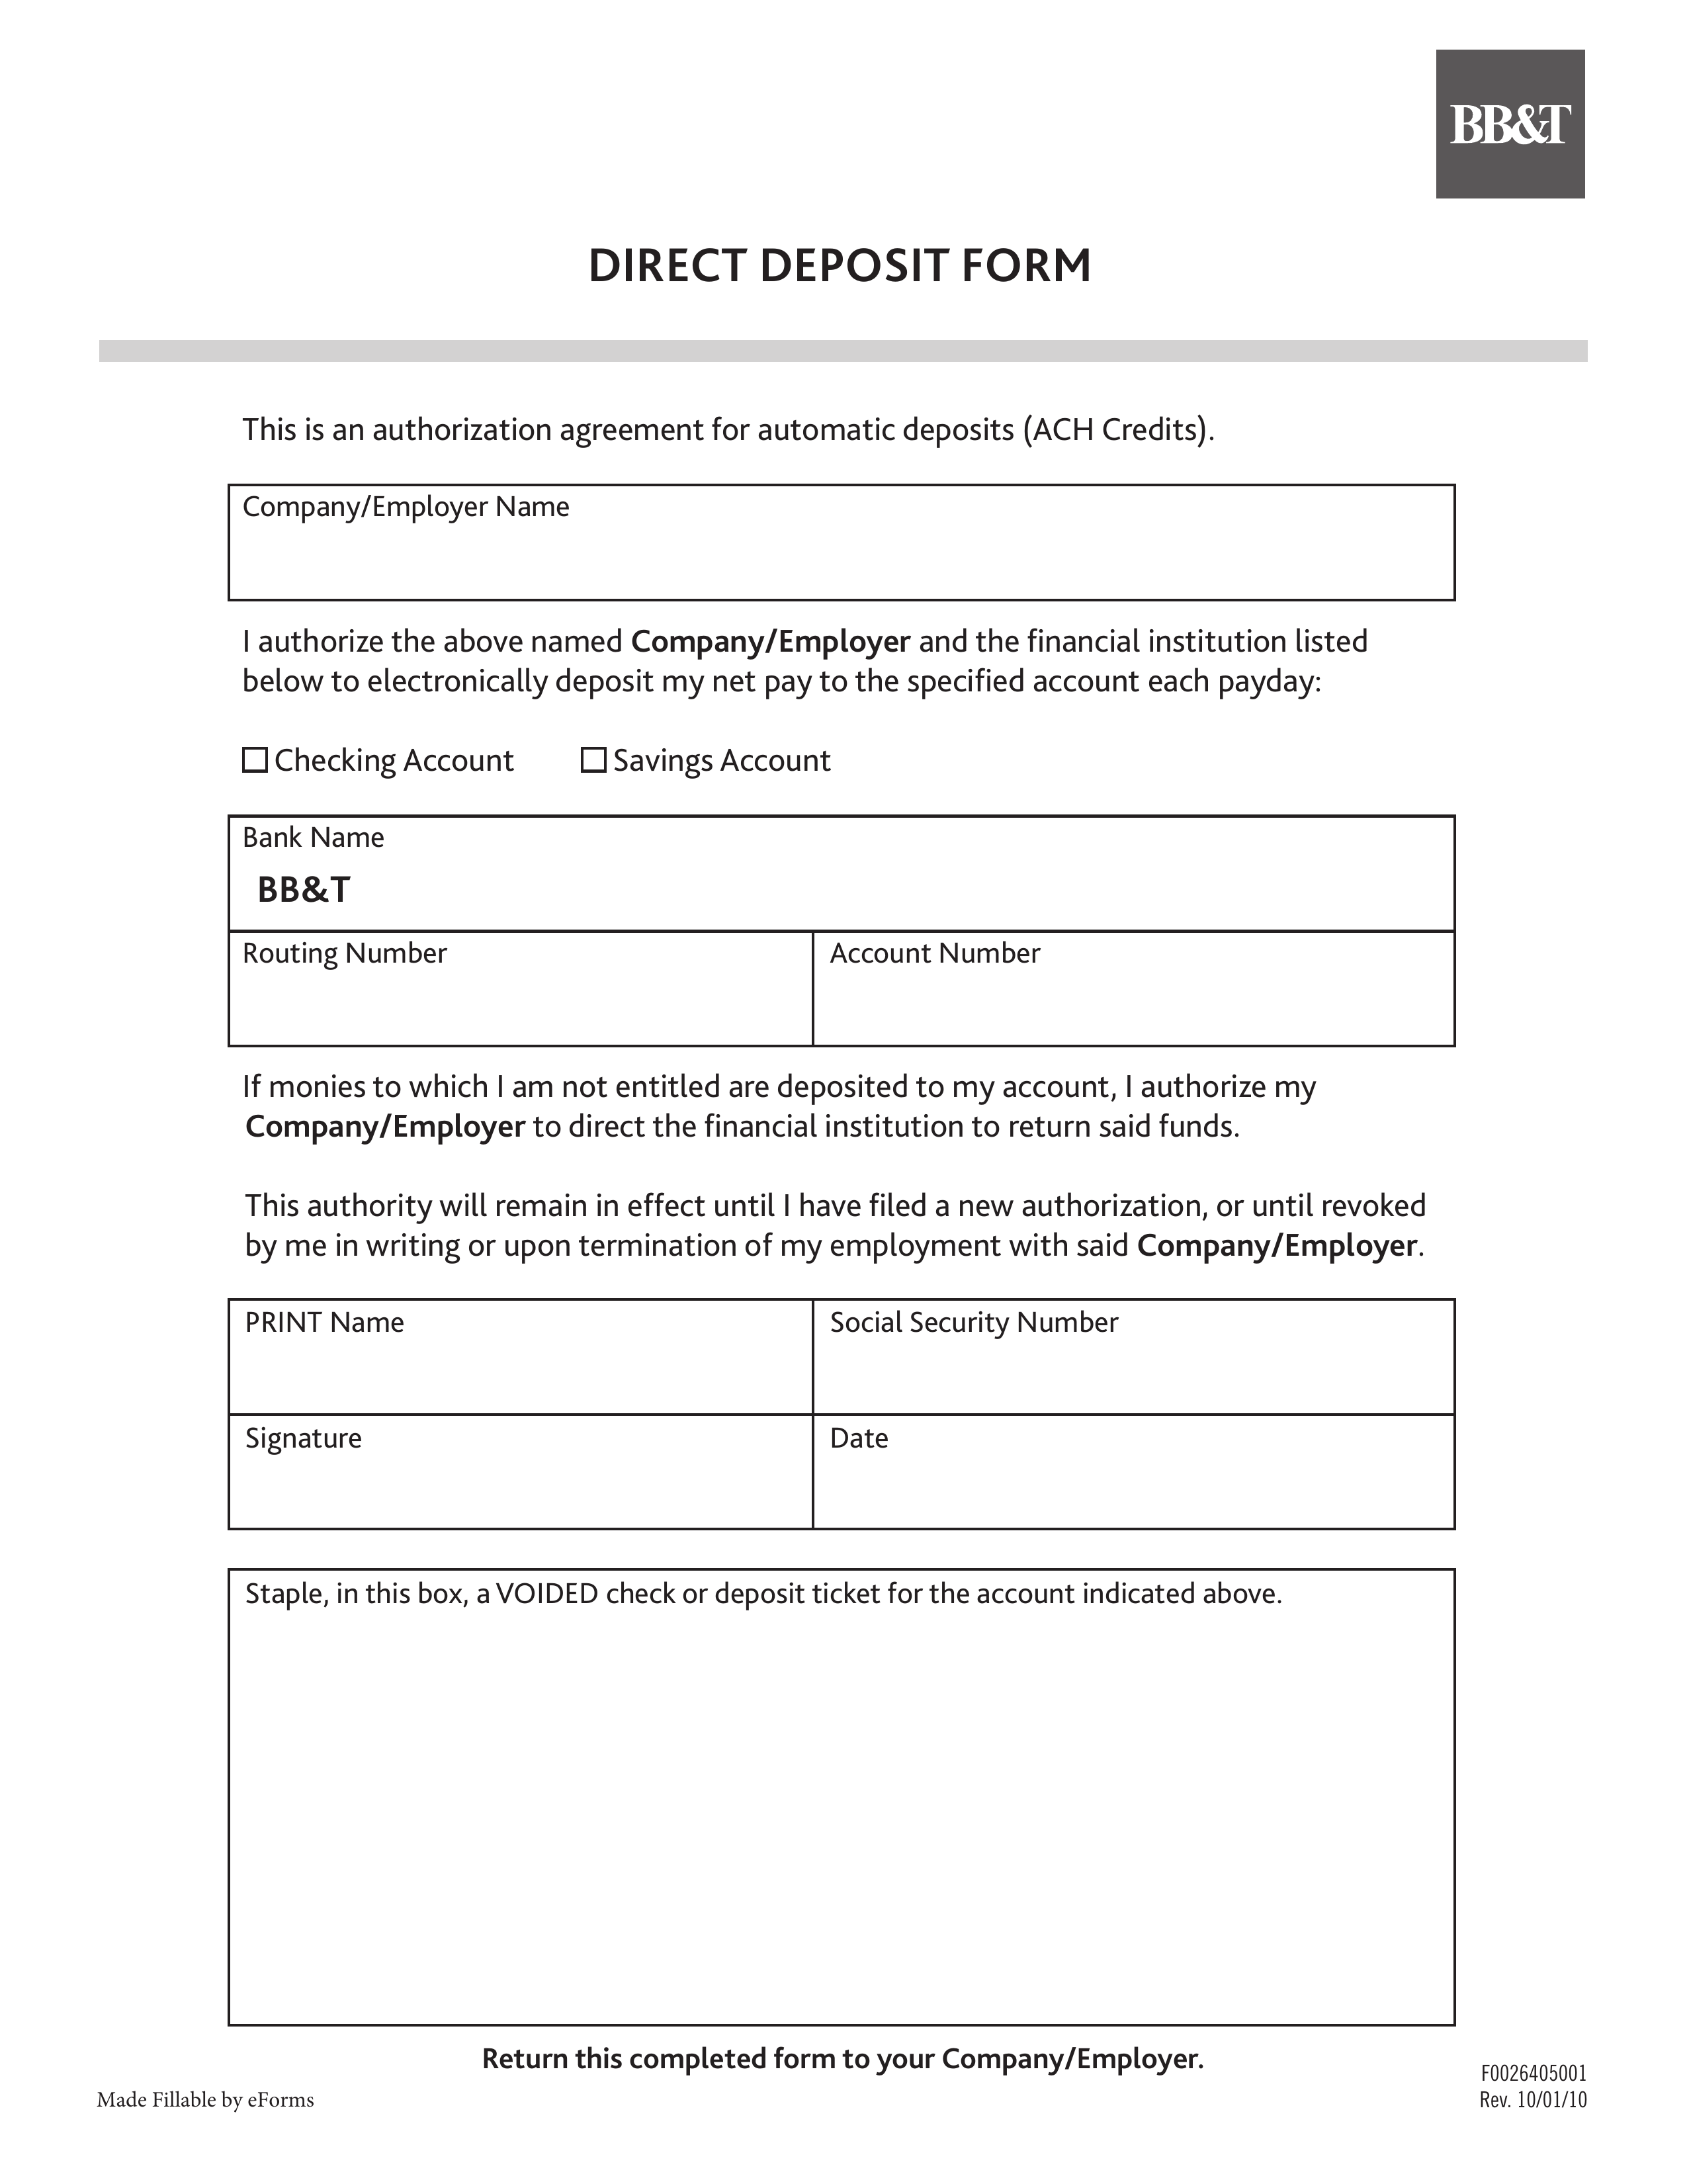 Free BB&T Direct Deposit Authorization Form - PDF – eForms With Regard To Generic Direct Deposit Authorization Form With Regard To Generic Direct Deposit Authorization Form